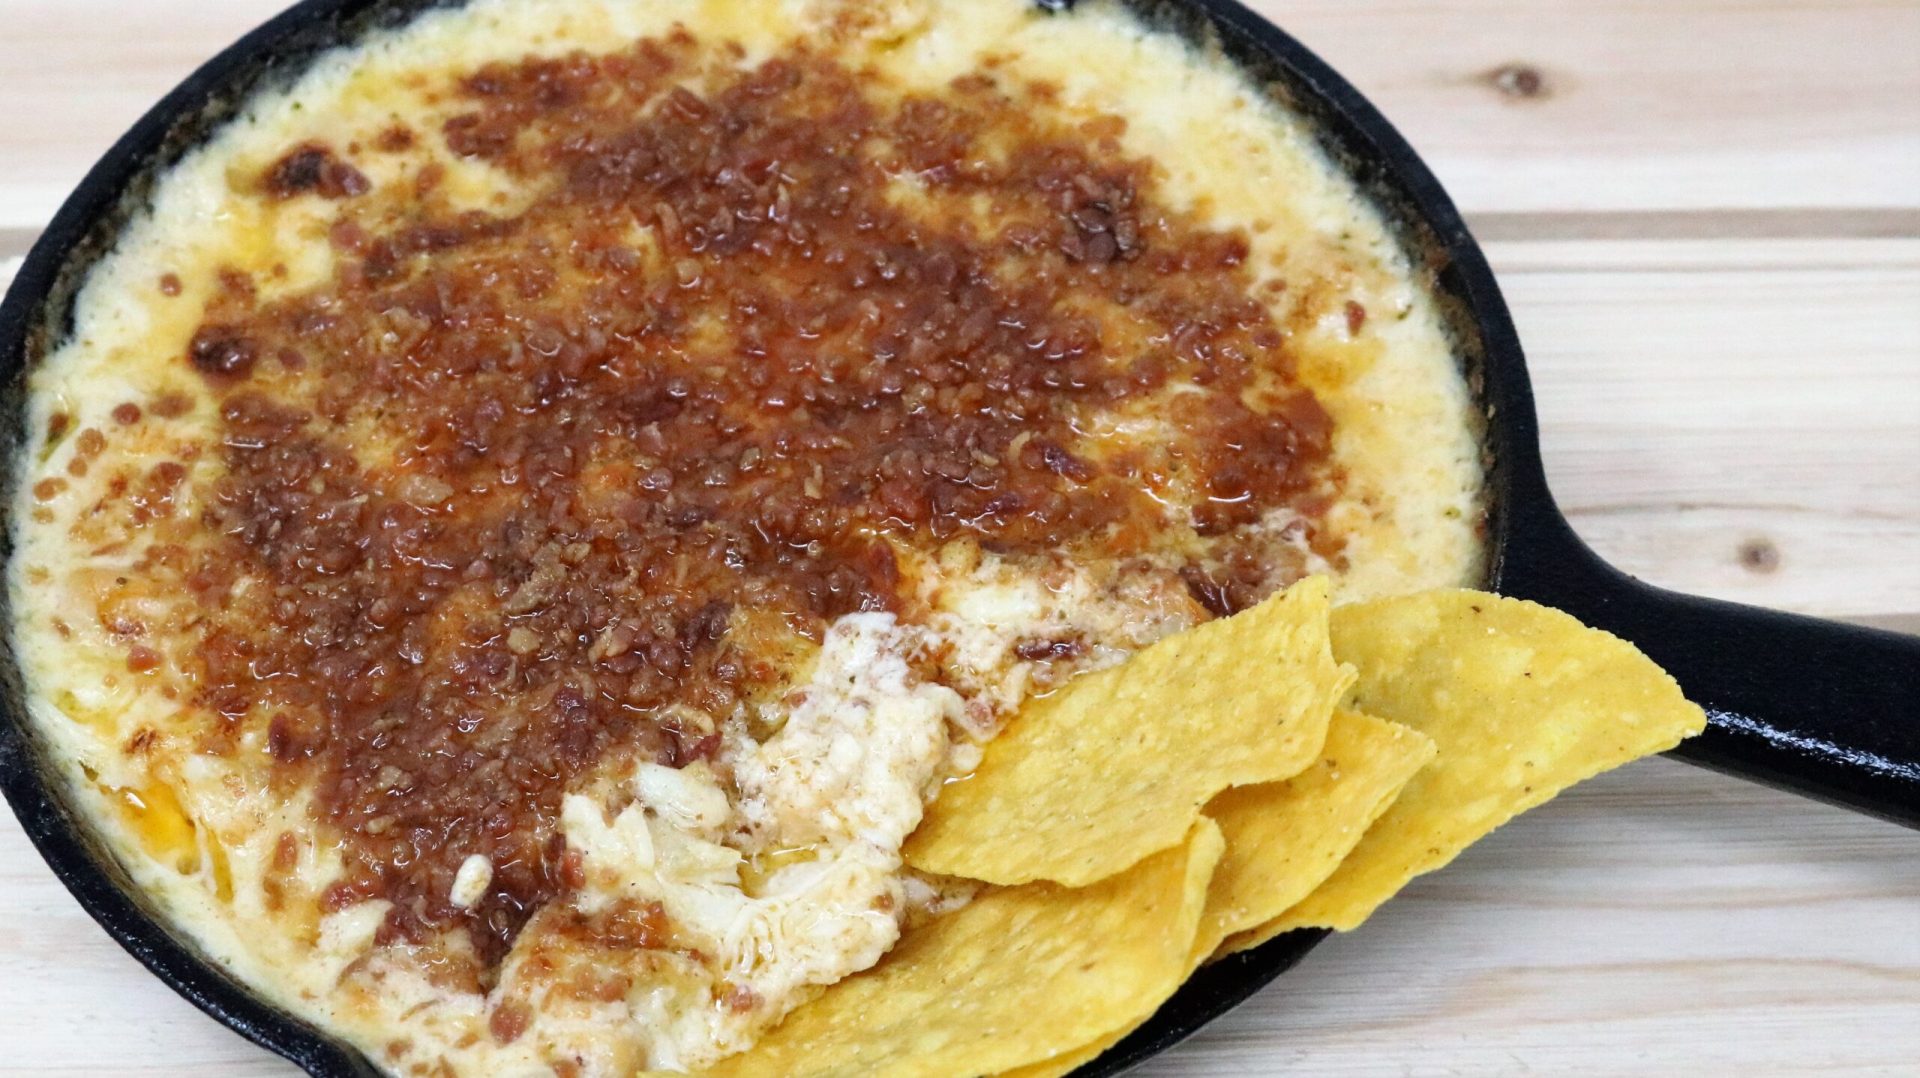 A bowl of dip with tortilla chips on the side.